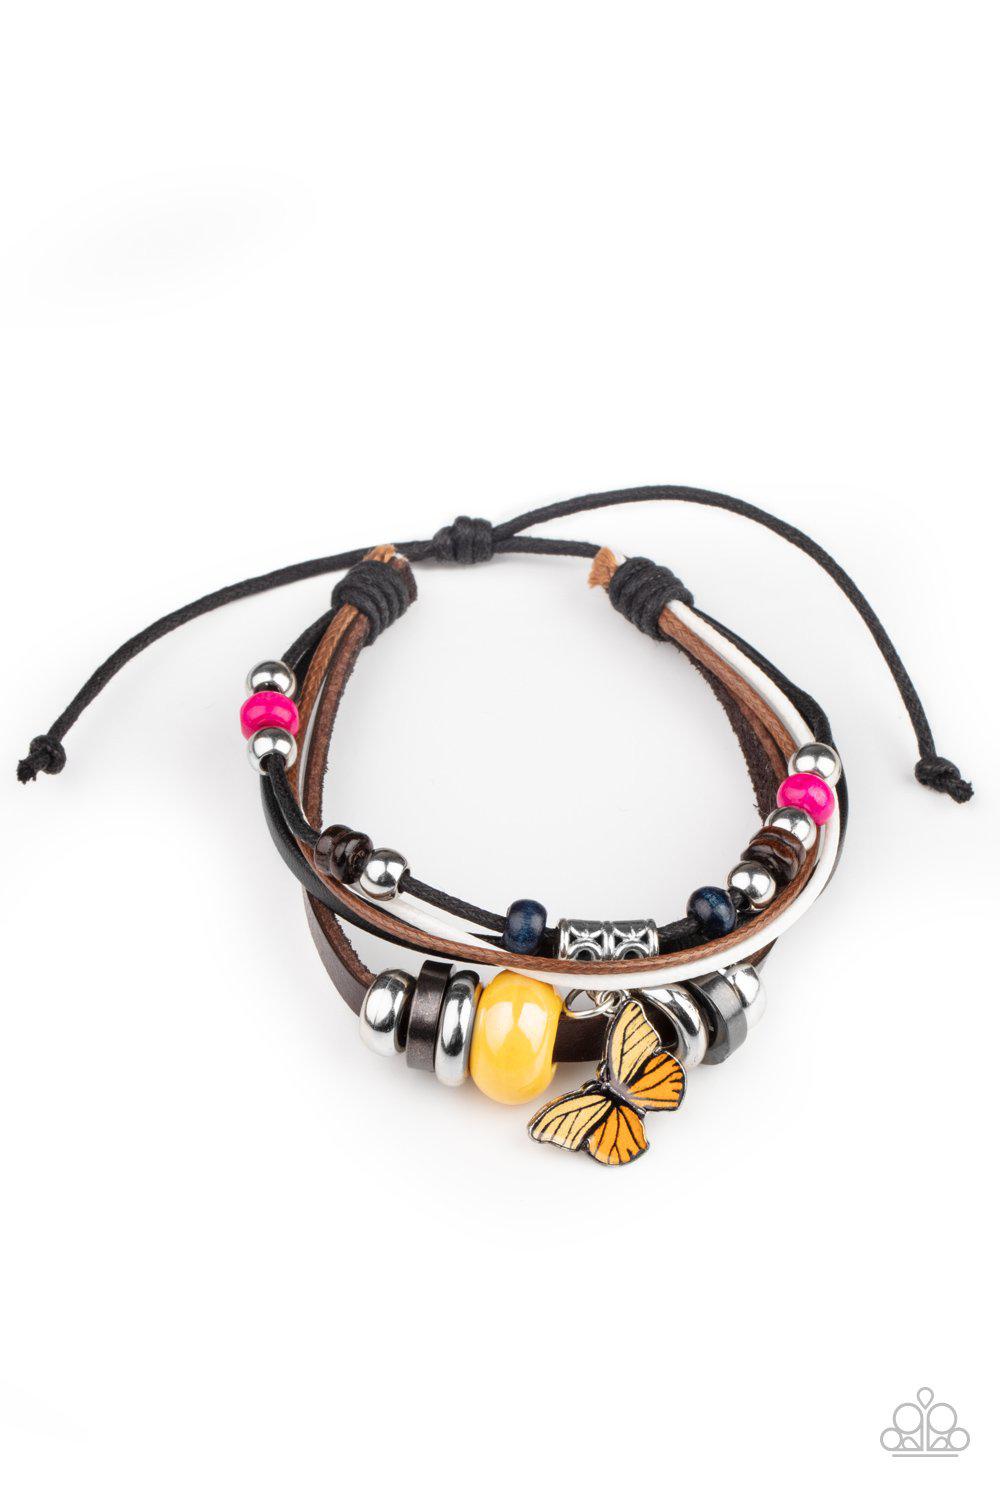 Bodacious Butterfly Multi-colored Bead and Leather Urban Knot Bracelet - Paparazzi Accessories- lightbox - CarasShop.com - $5 Jewelry by Cara Jewels